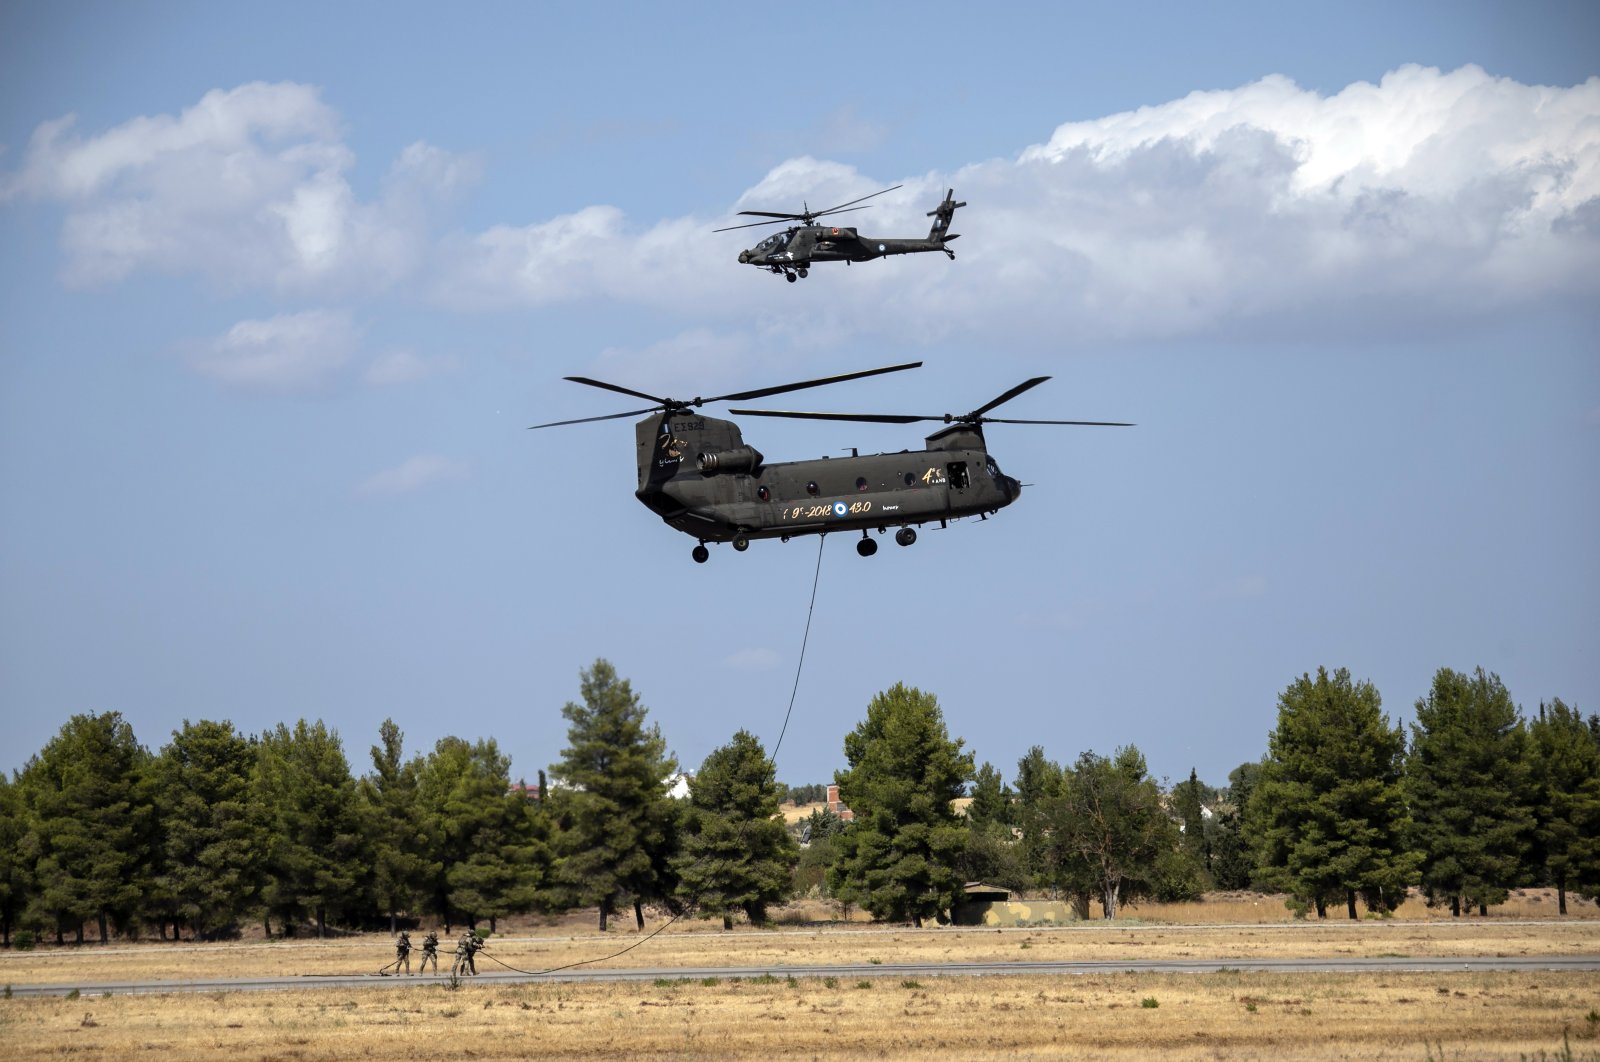 Greek military special forces perform with a CH-47 and a Kiowa helicopters during an airshow at Tanagra air base, north of Athens, Greece, Sept. 4, 2021. (AP Photo)